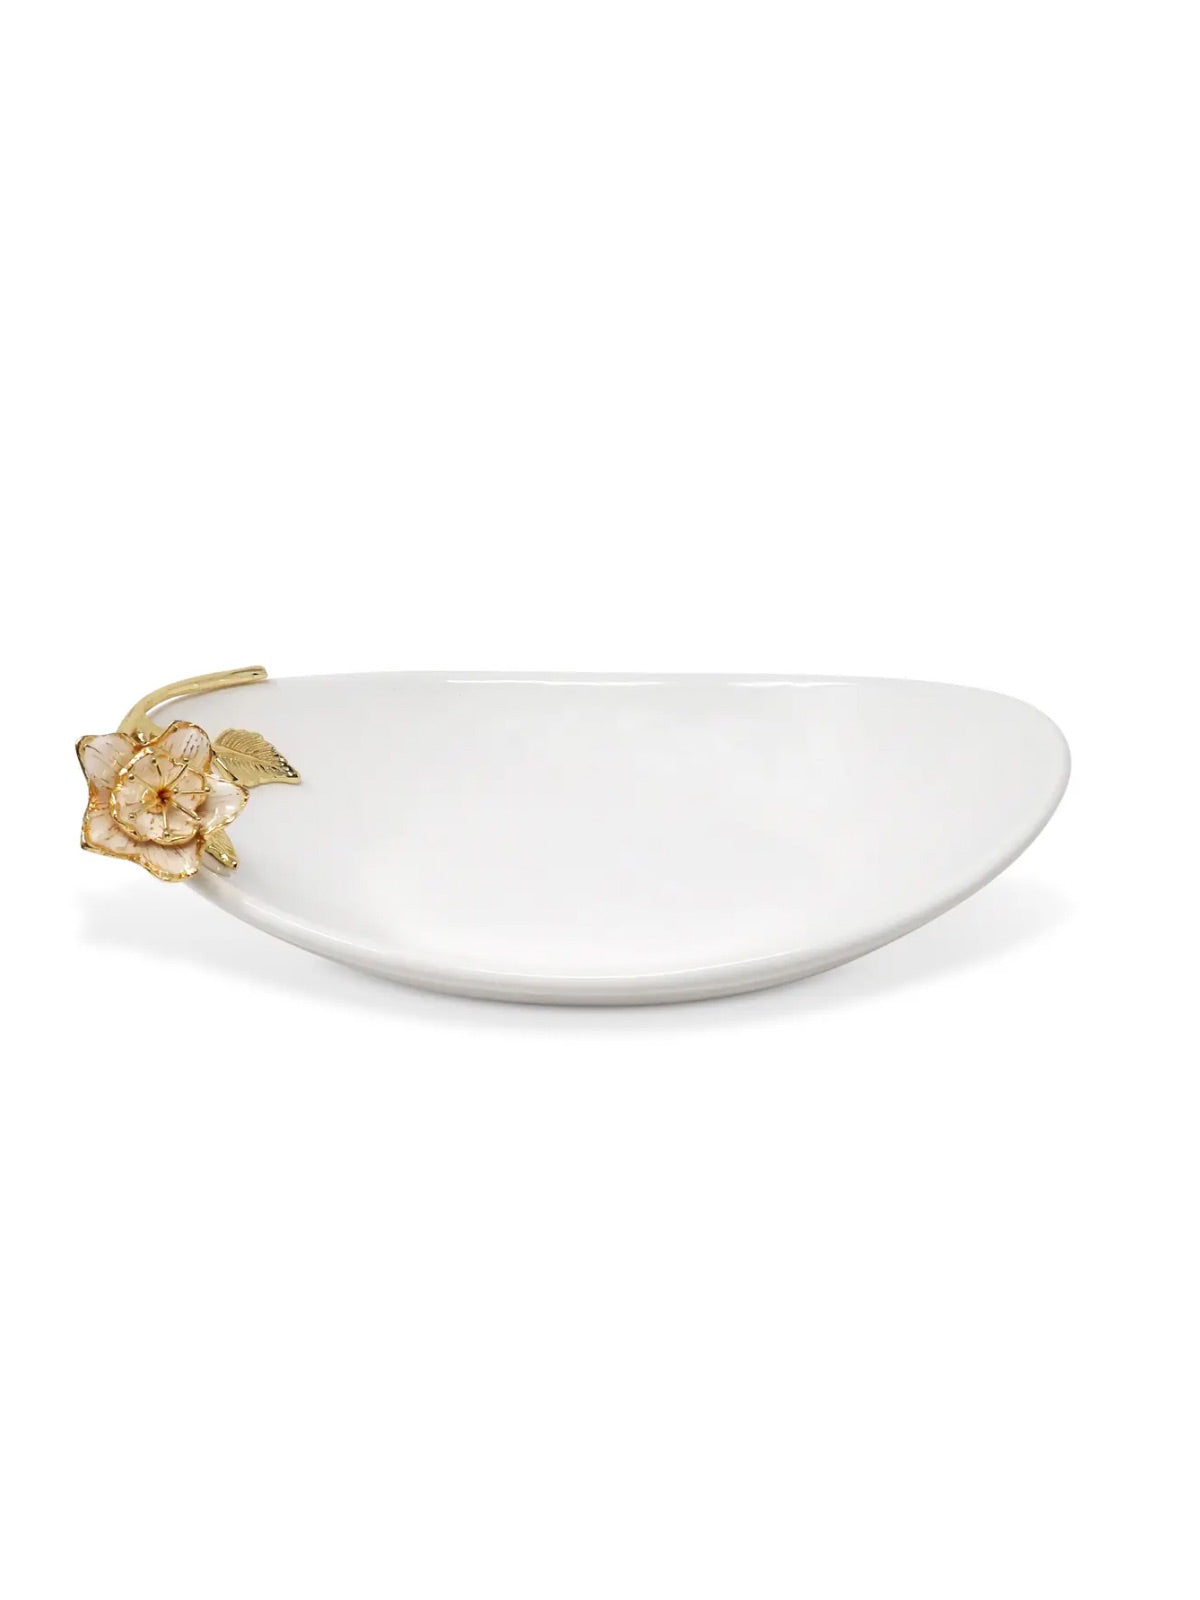 White Porcelain Oval Bowl with Luxury Gold Flower Detail.